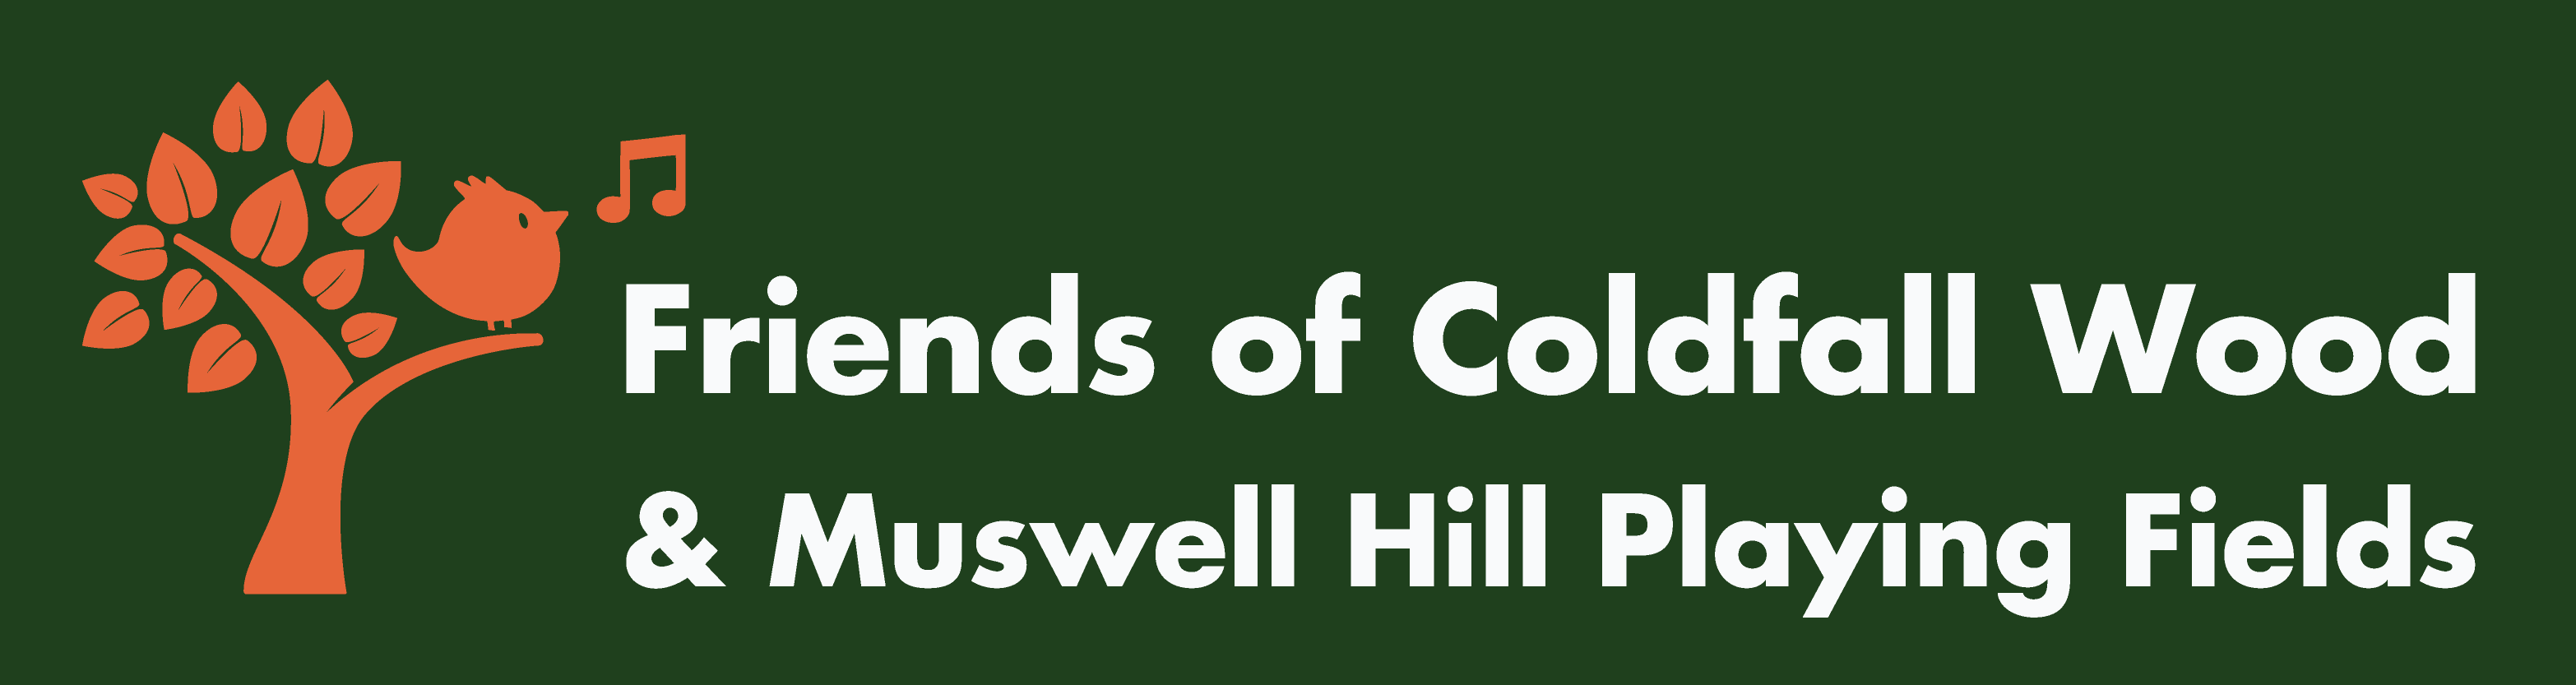 Friends of Coldfall Wood & Muswell Hill Playing Fields